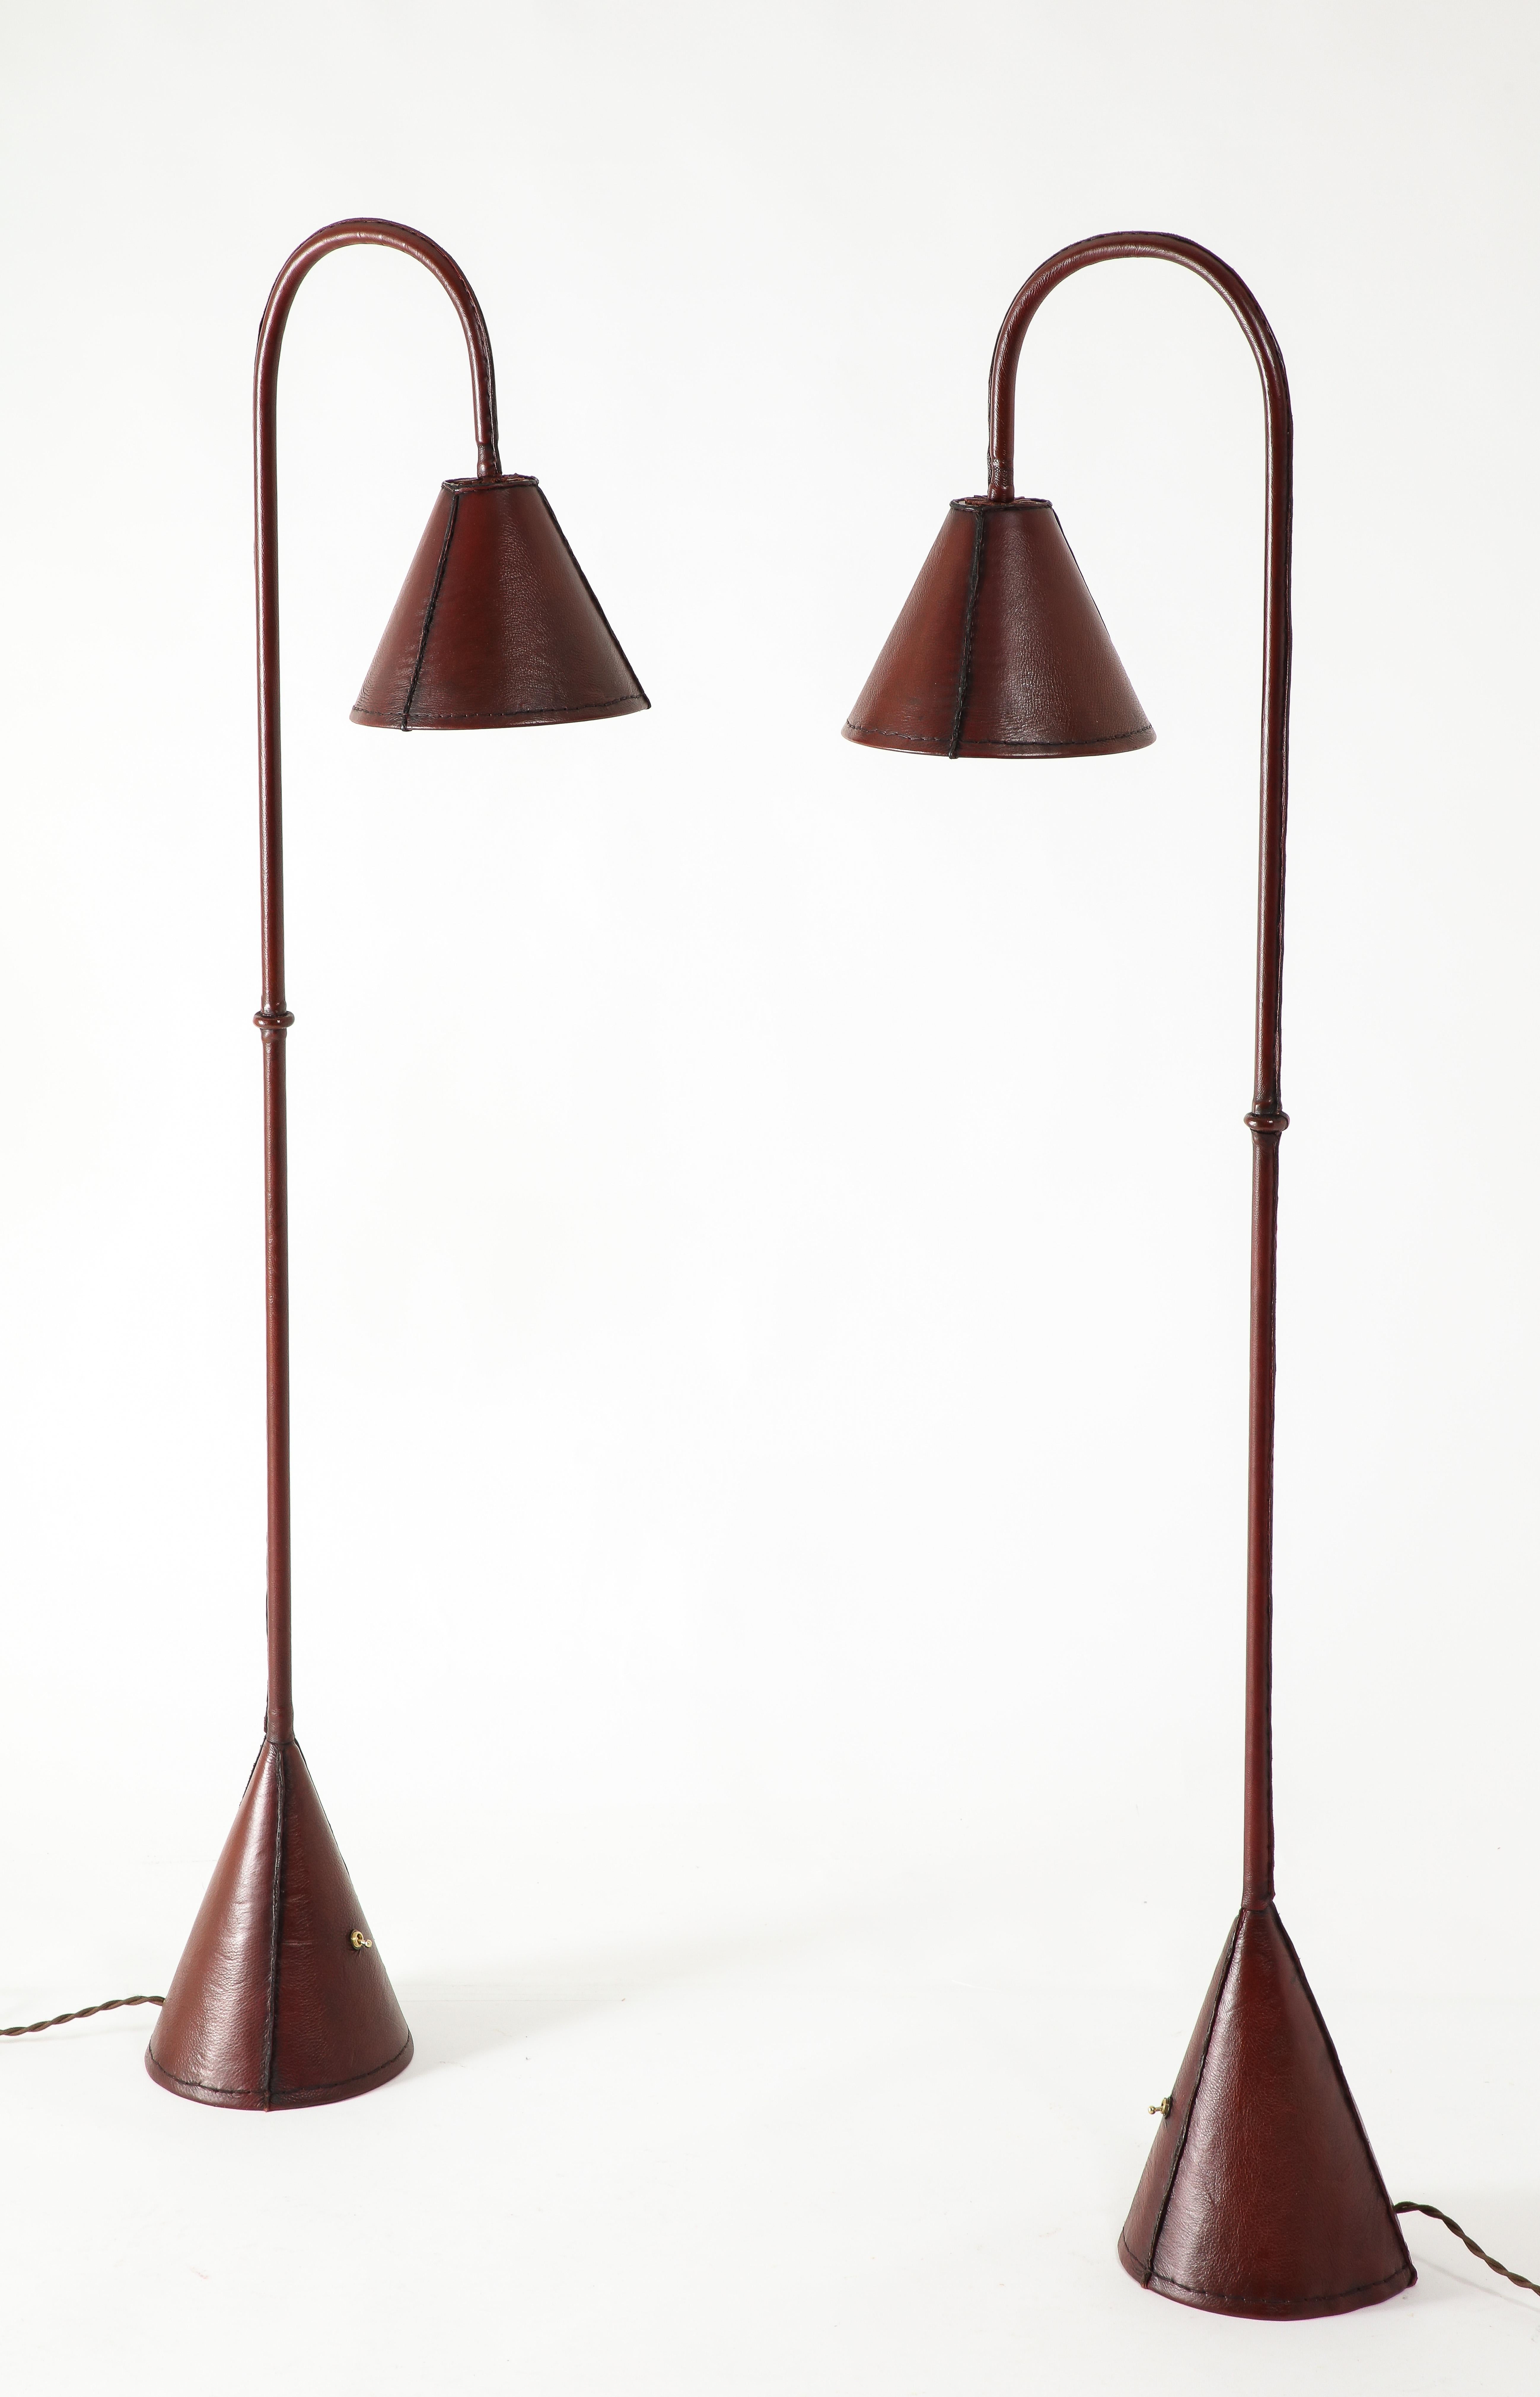 Valenti / Adnet Reading Floor Lamps, France 1950's For Sale 12